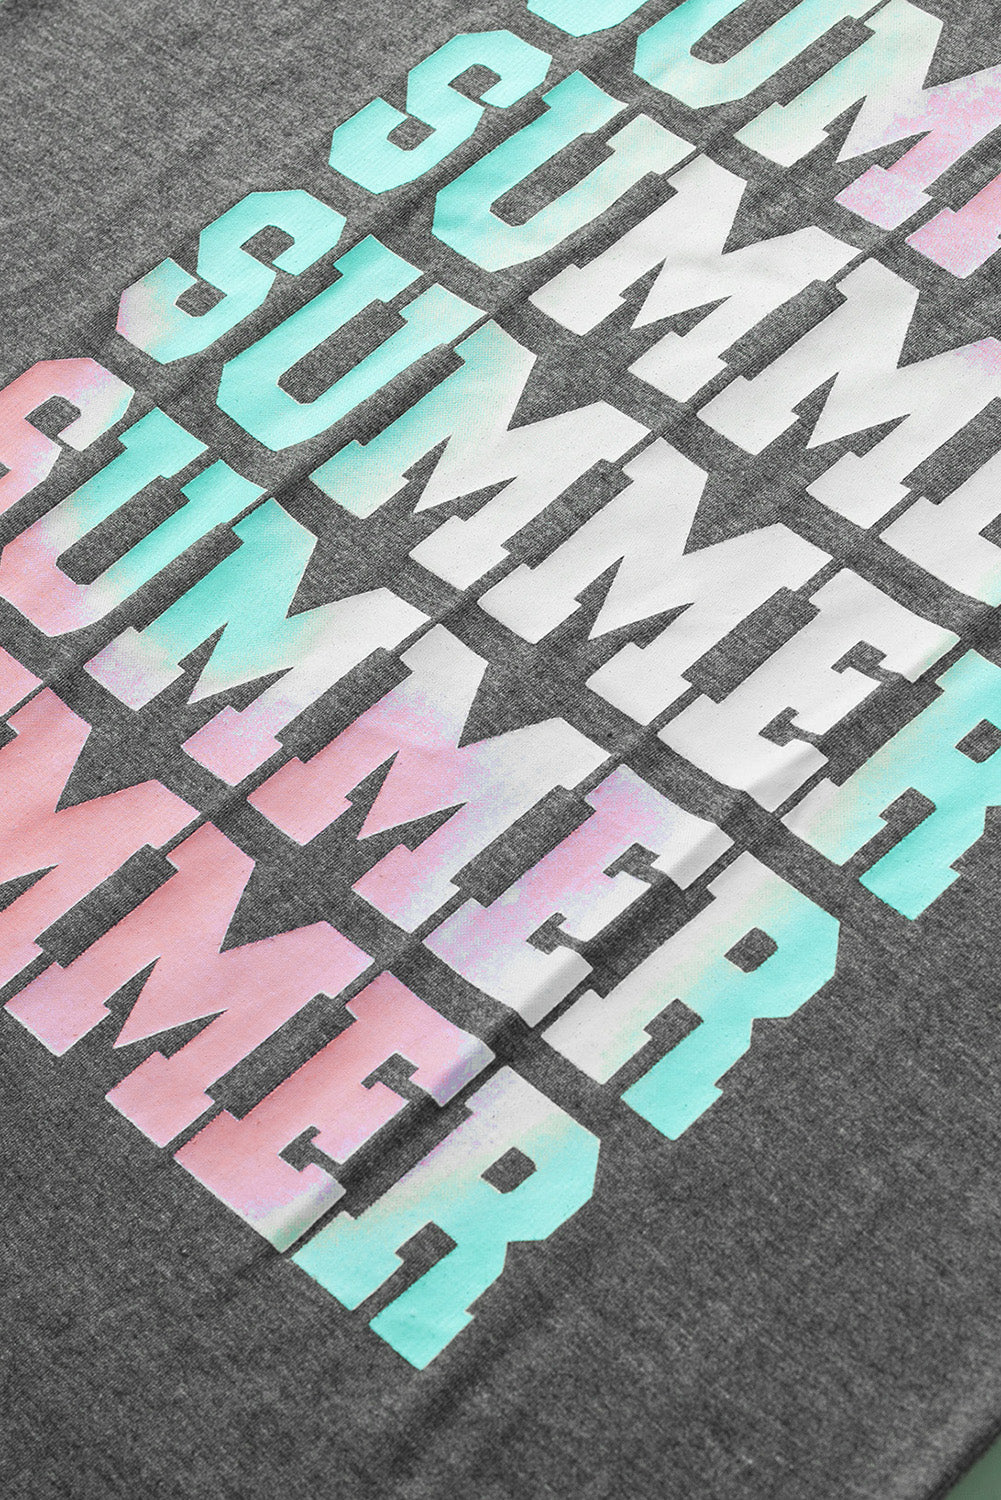 SUMMER Graphic Tank Top